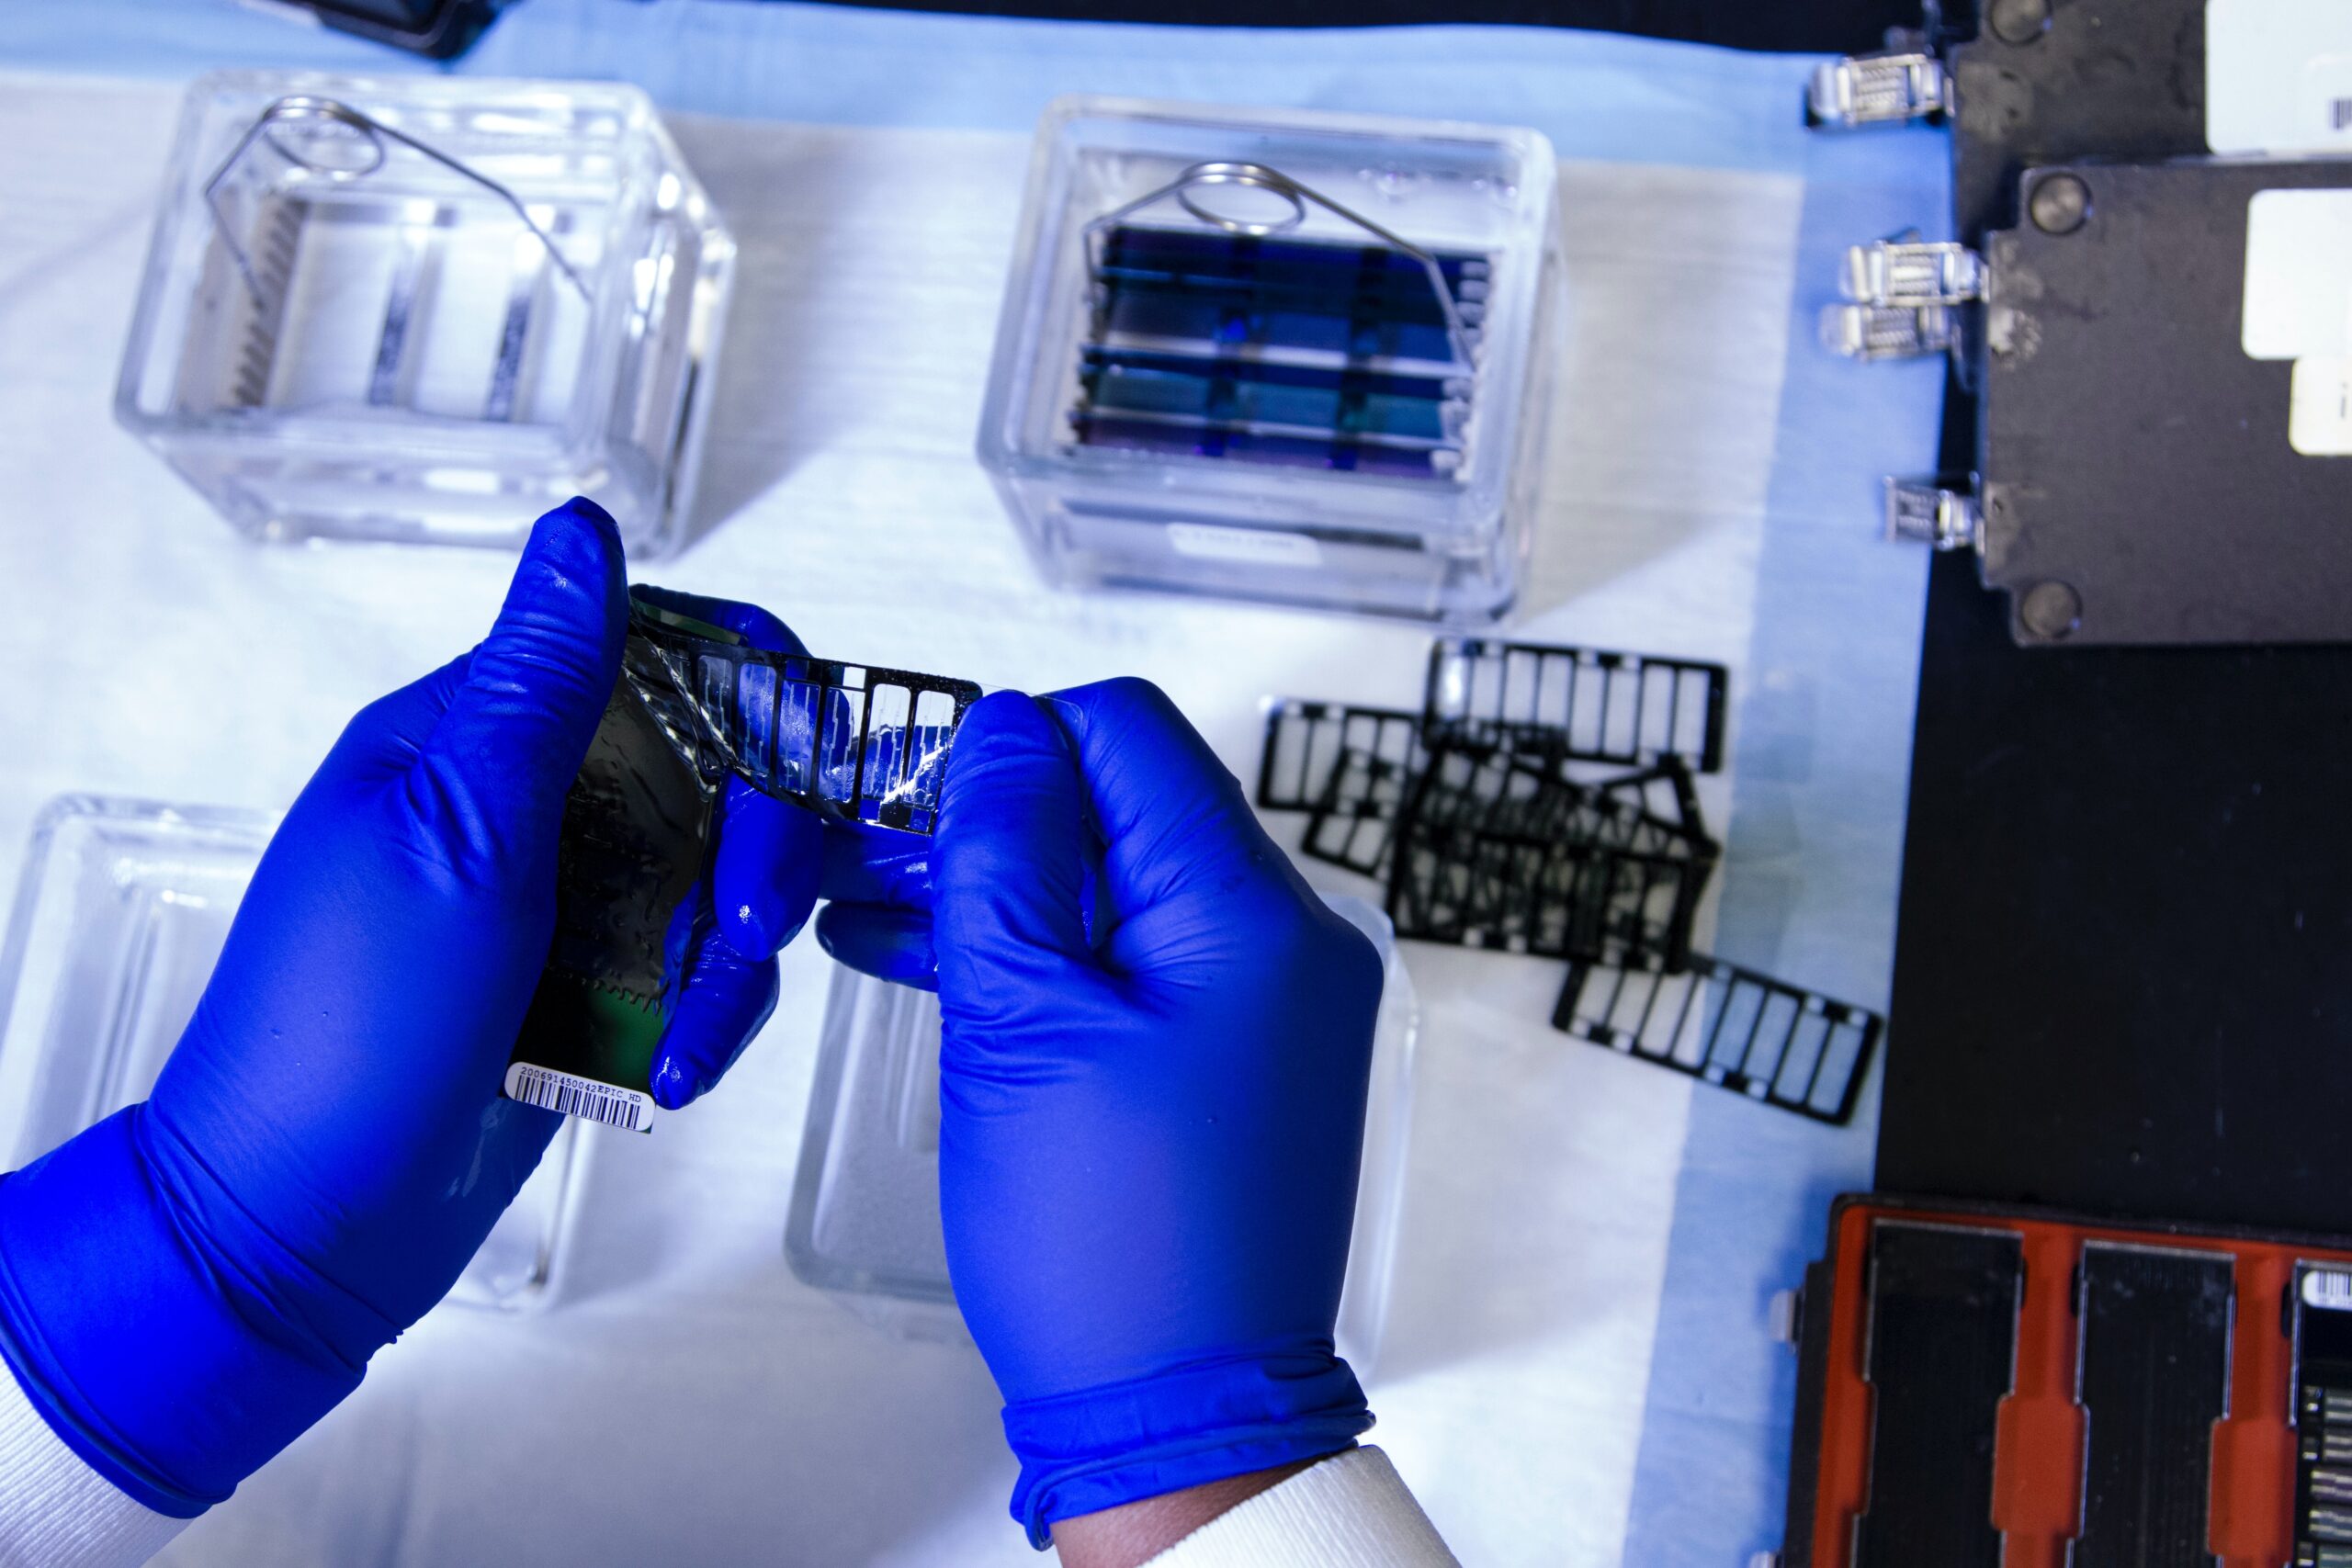 A technician washes an array used in DNA genotyping and sequencing, searching the genome for small variations called single nucleotide polymorphisms (SNPs). (Image: National Cancer Institute/Unsplash)